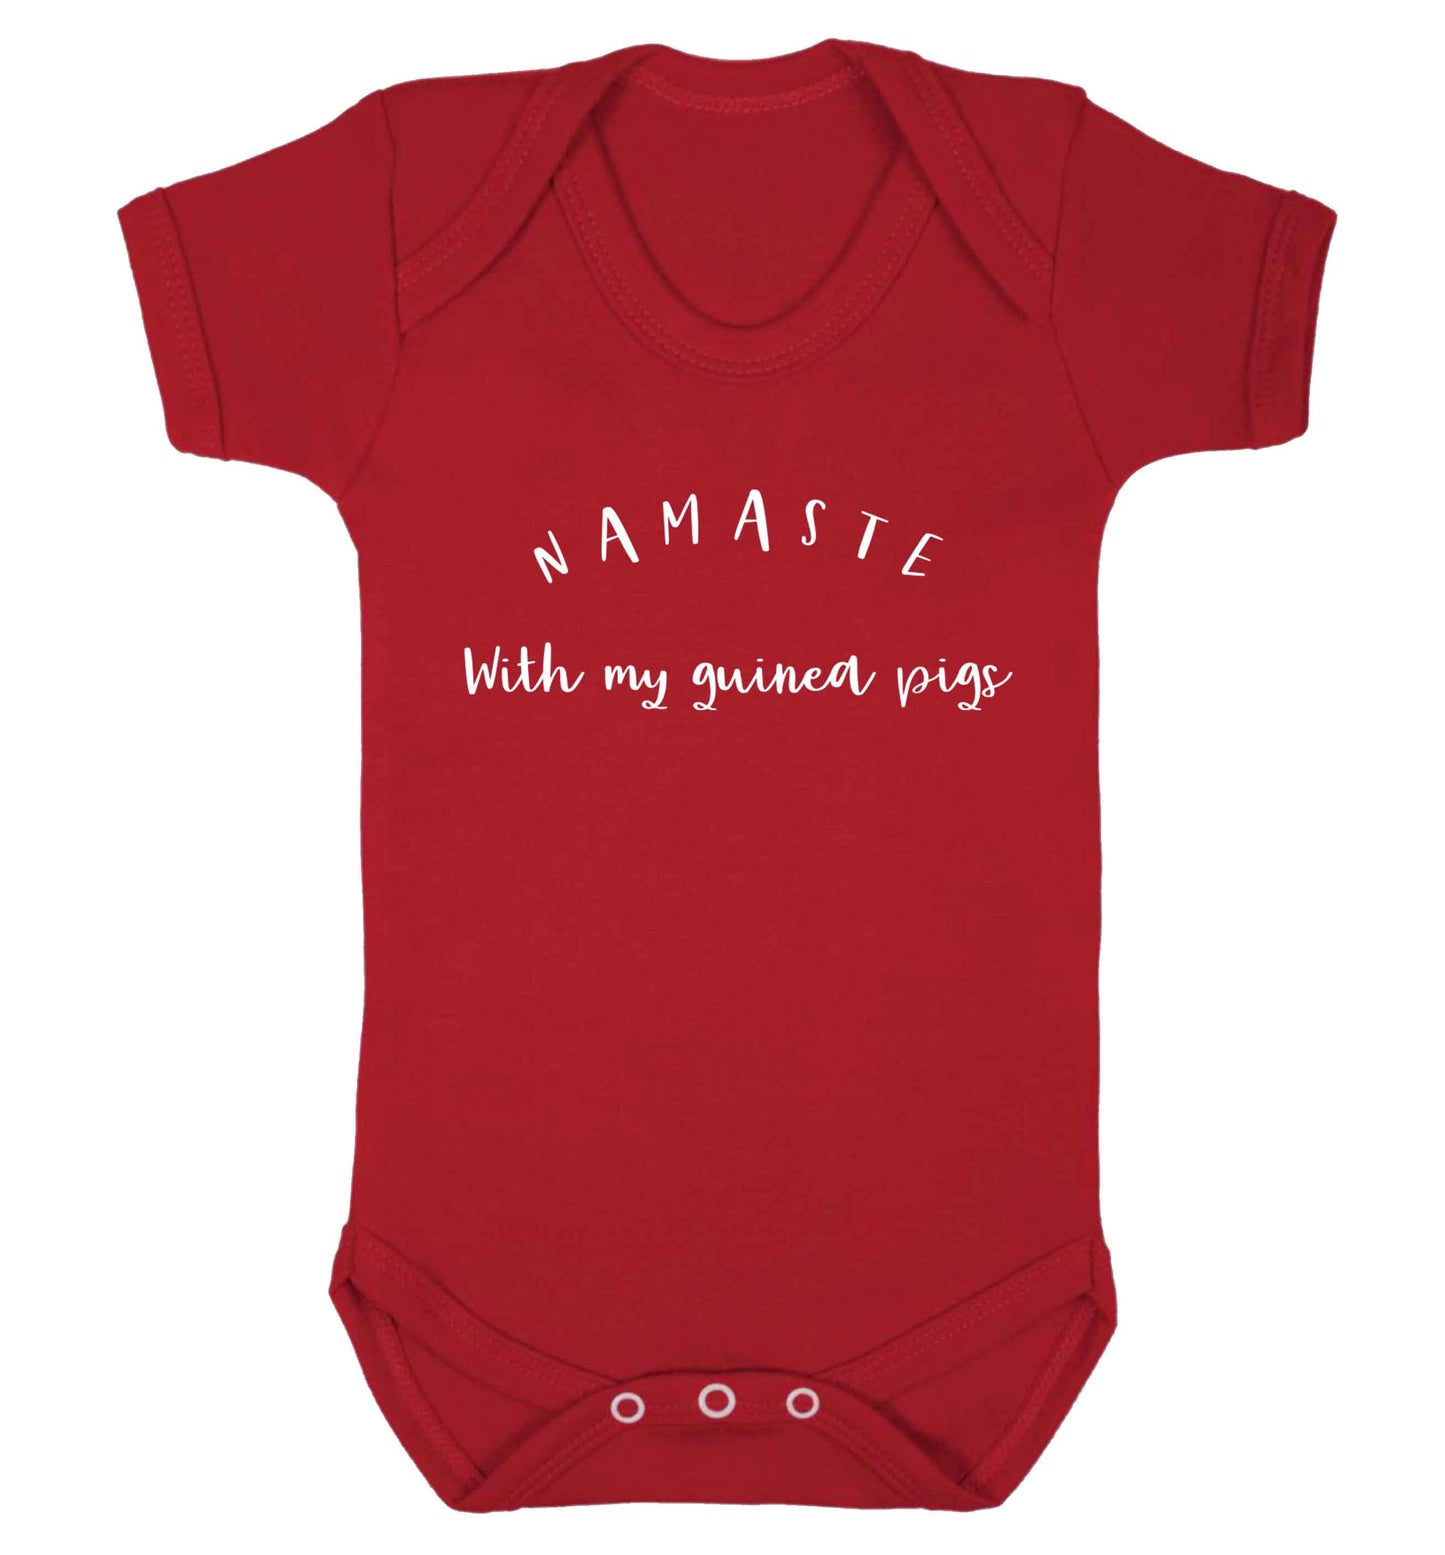 Namaste with my guinea pigs Baby Vest red 18-24 months